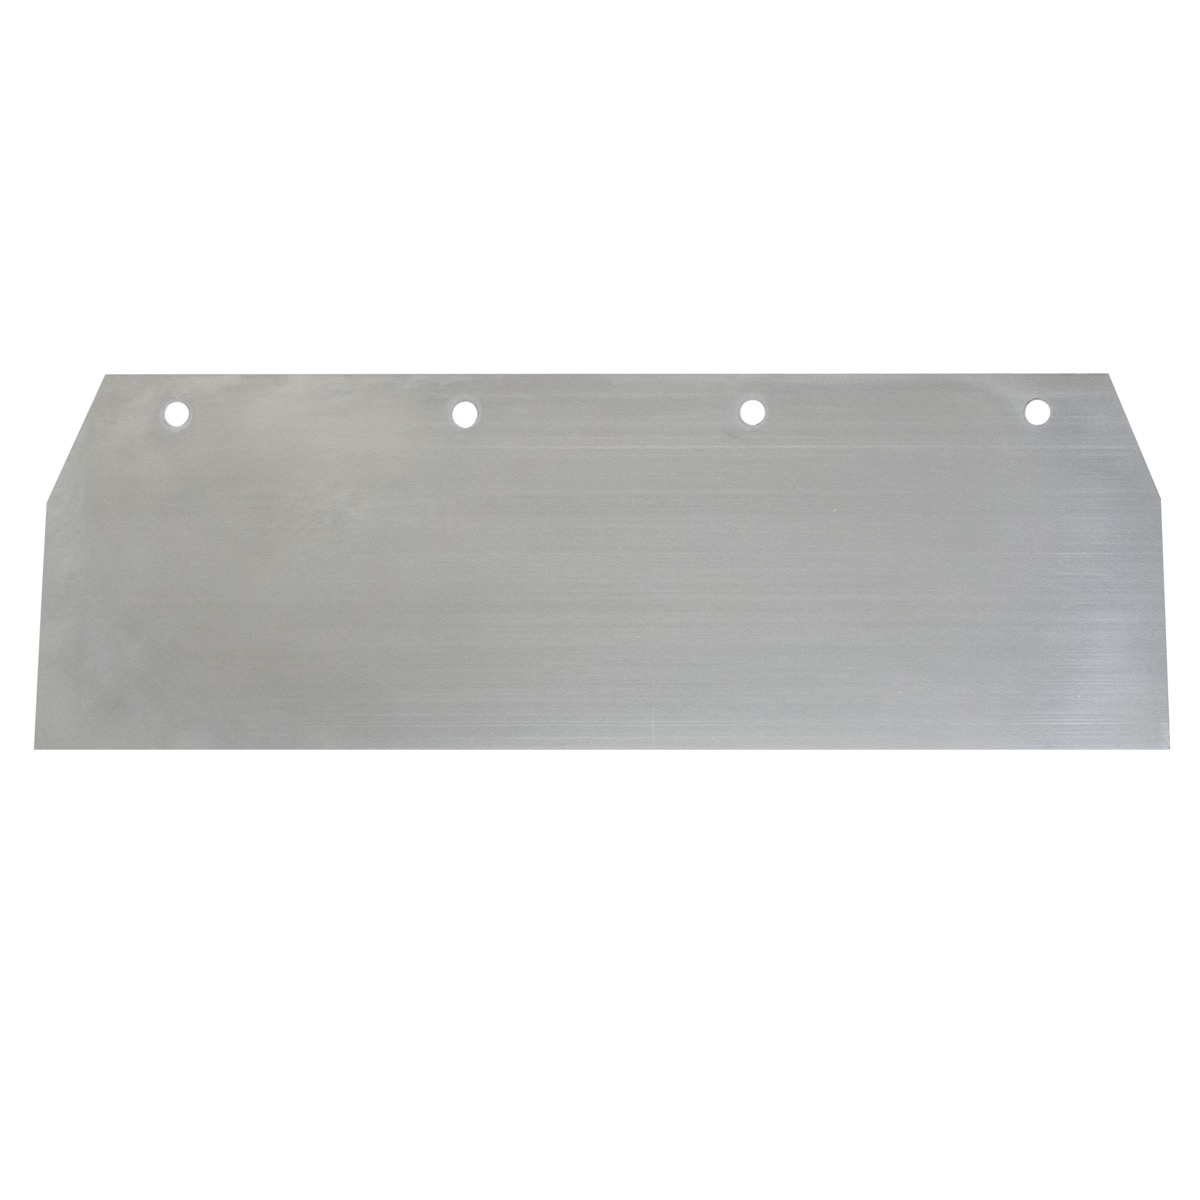 Concrete Scraper Replacement Blades made from steel. These replacement blades are durable and have enough flex to remove debris and heavy build up of materials in preparation for concrete pours. speedcrete, United Kingdom.